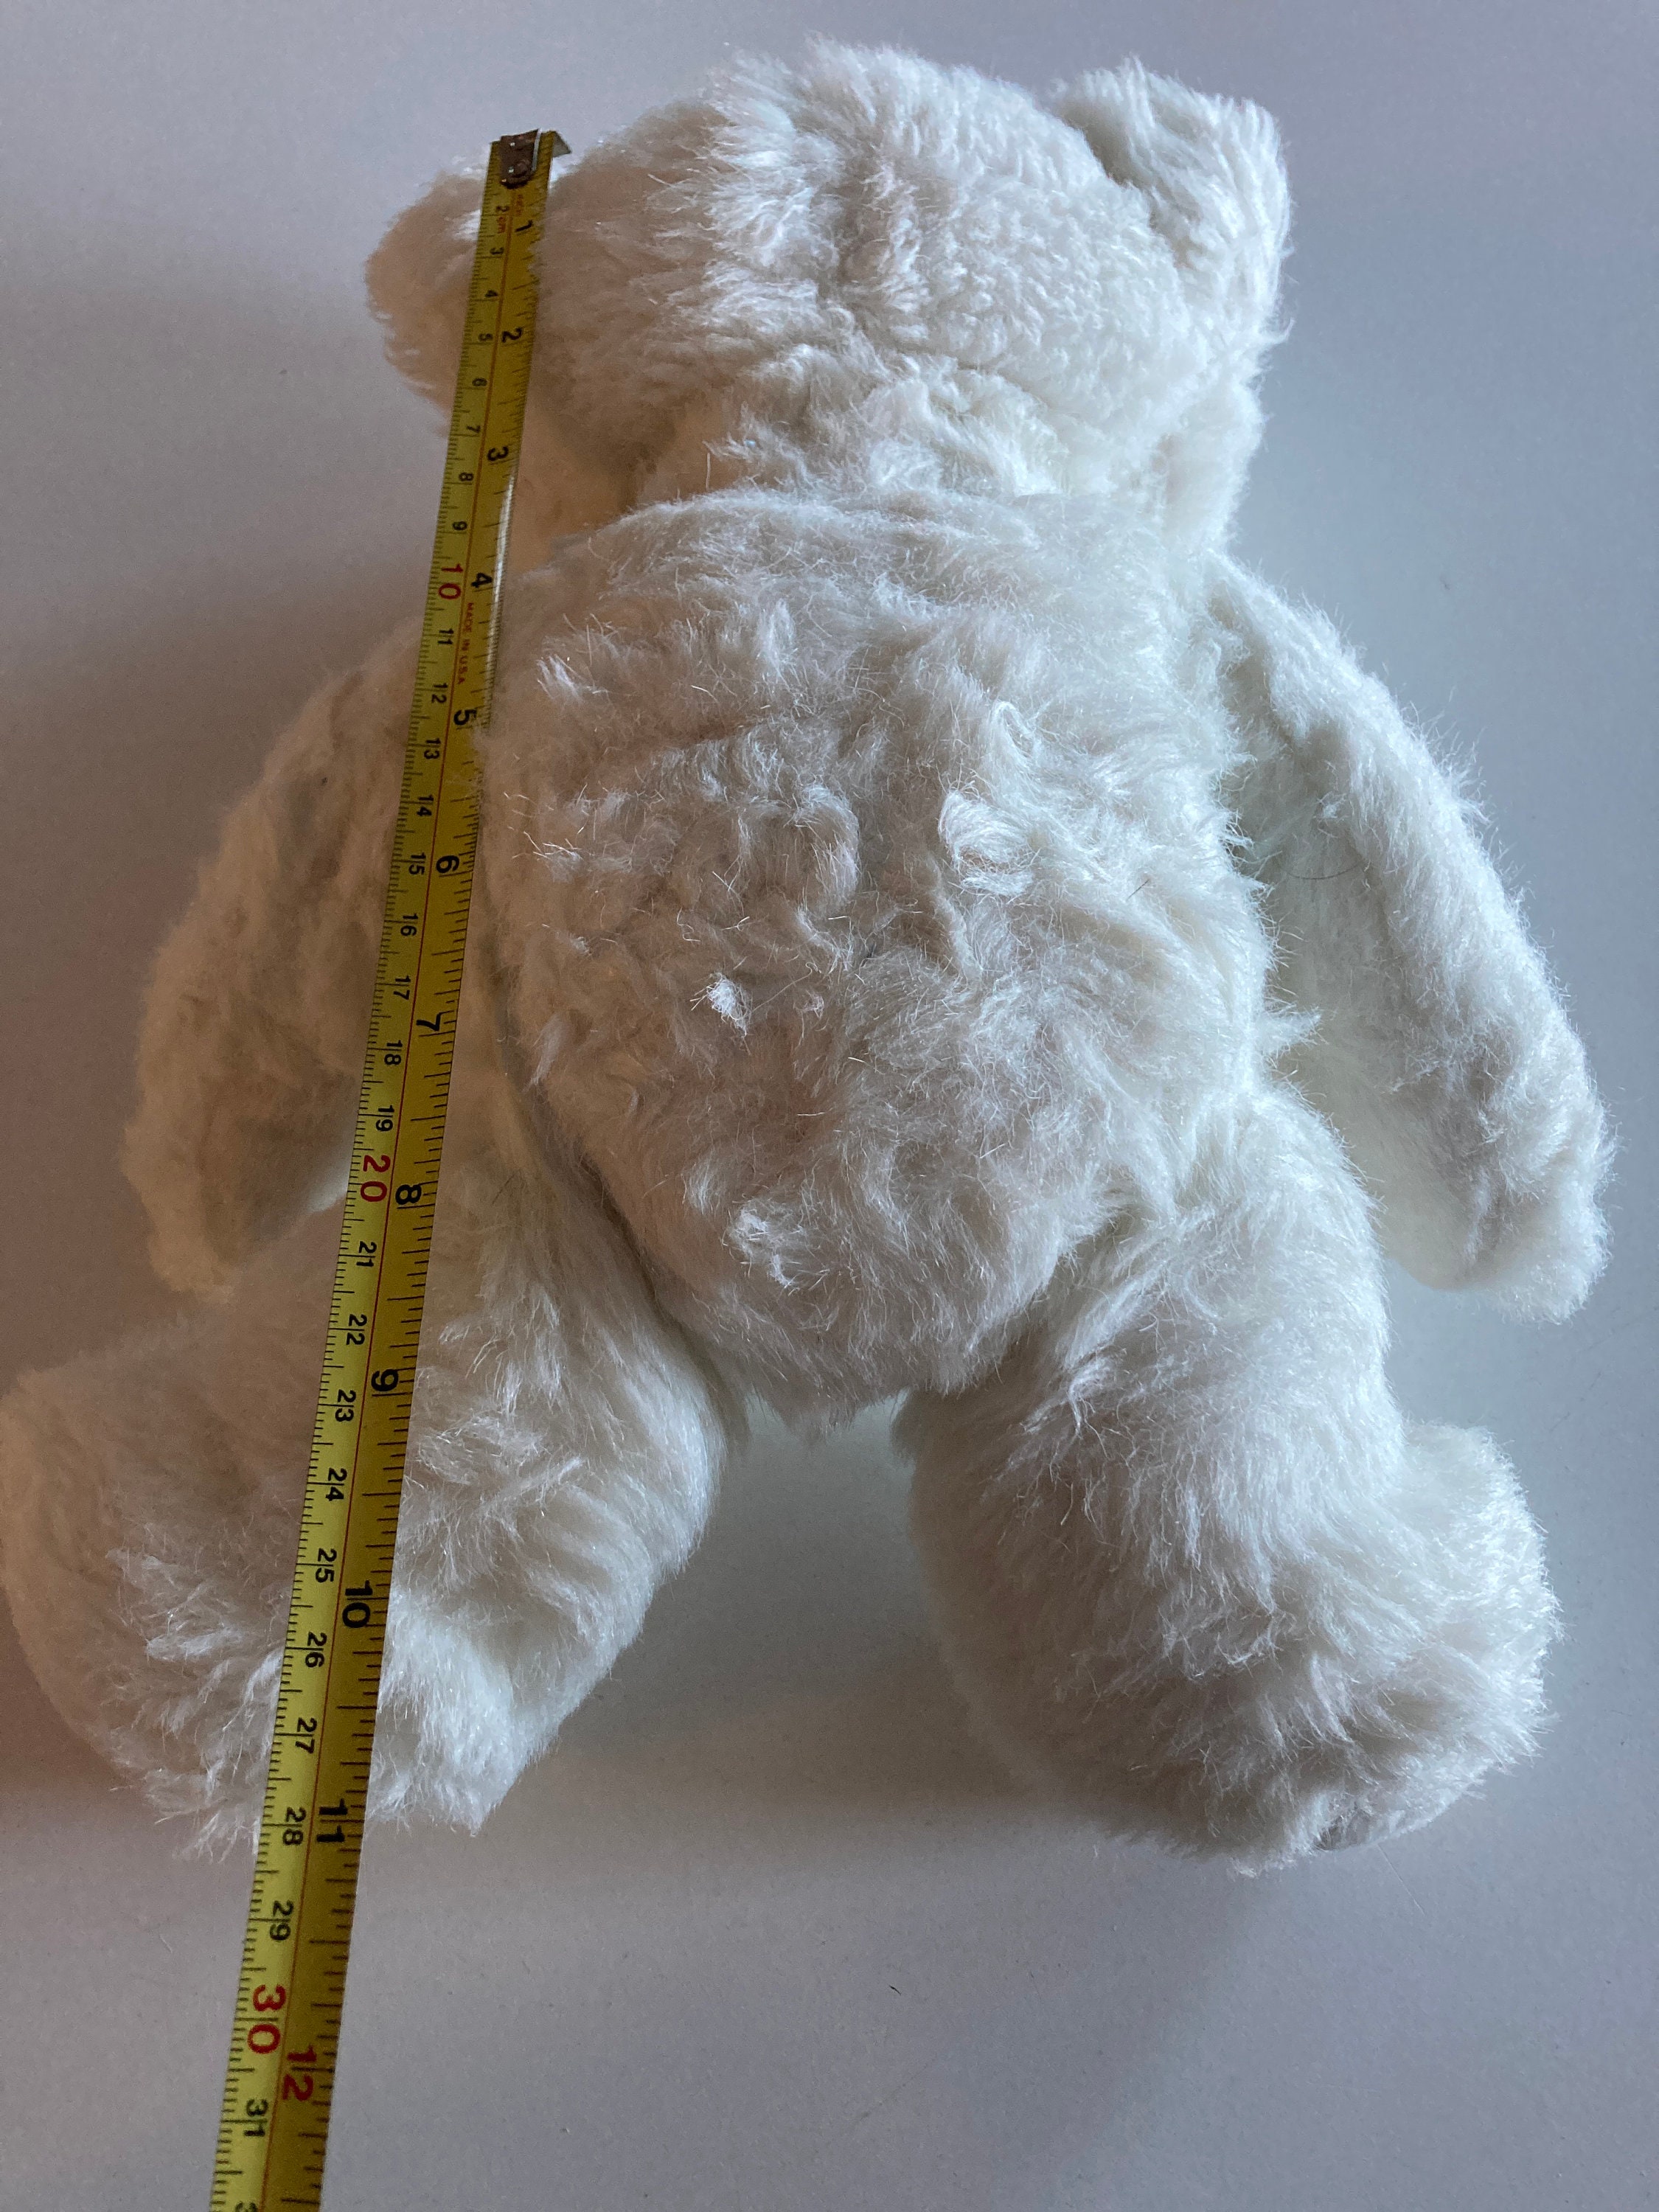 Vintage White Well Made Teddy Bear 12 Stuffed Plush Toy 